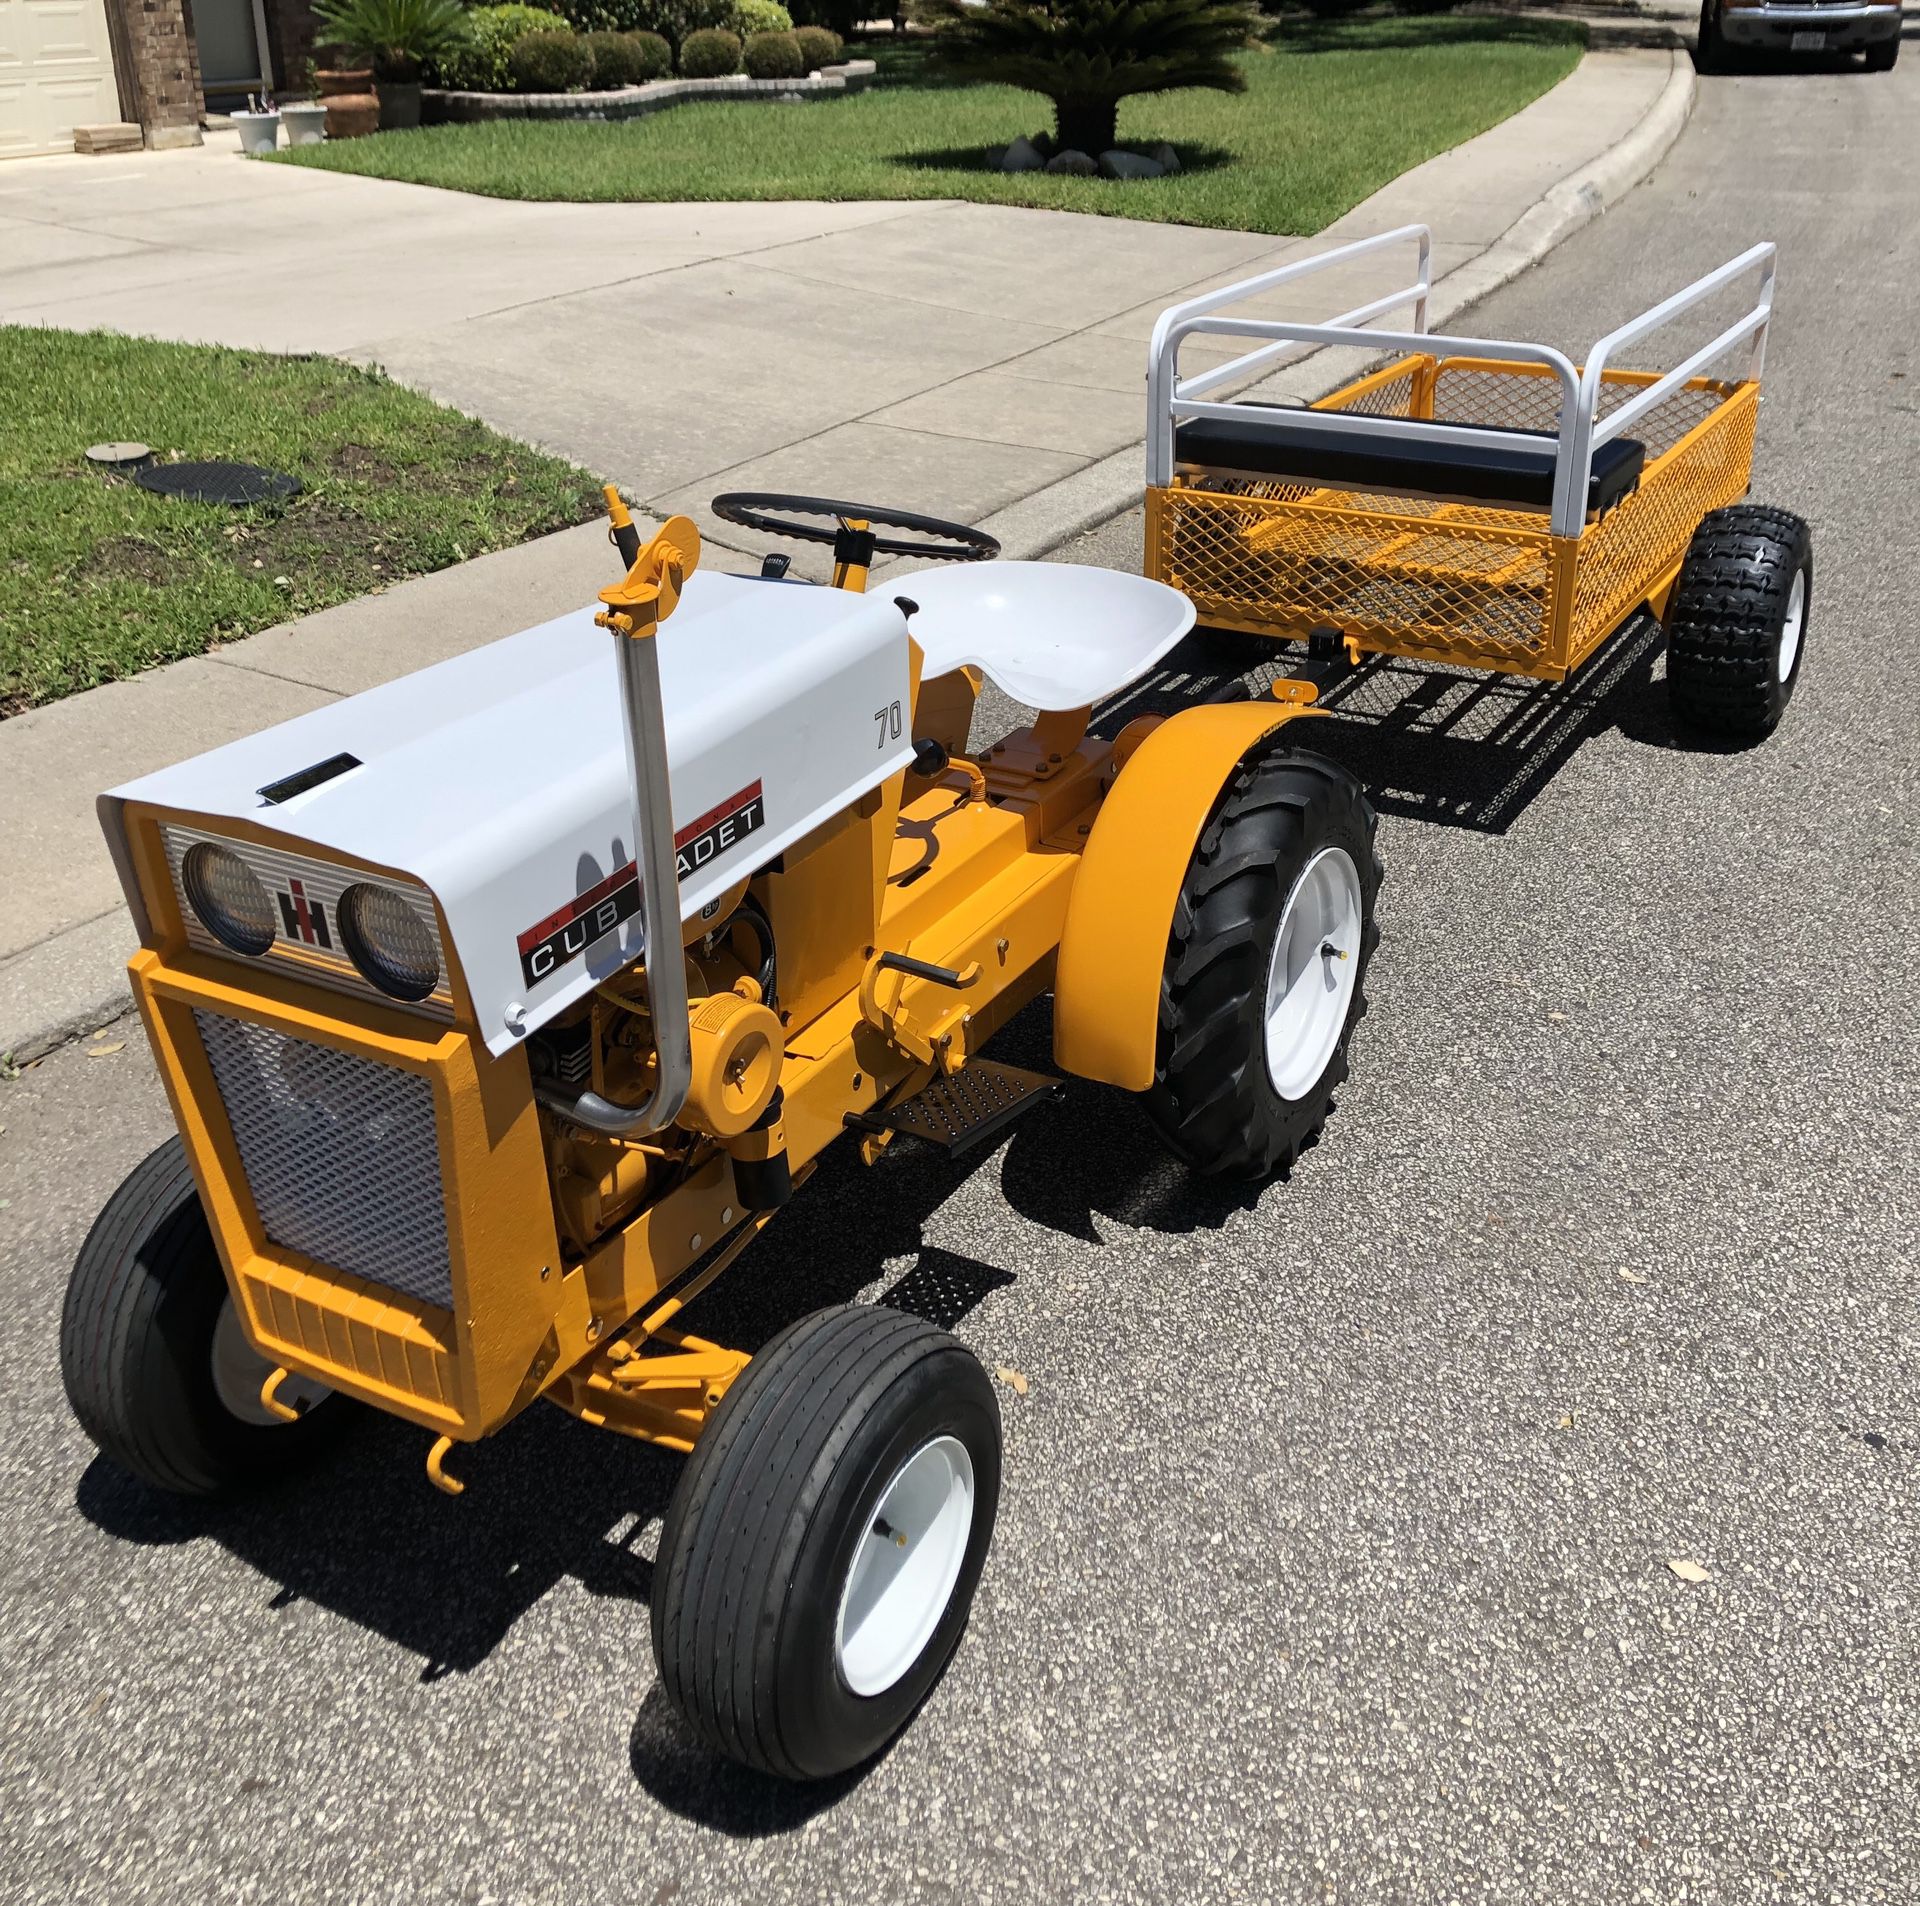 1964 Cub Cadet 70 & Trailer with working 42” mower deck